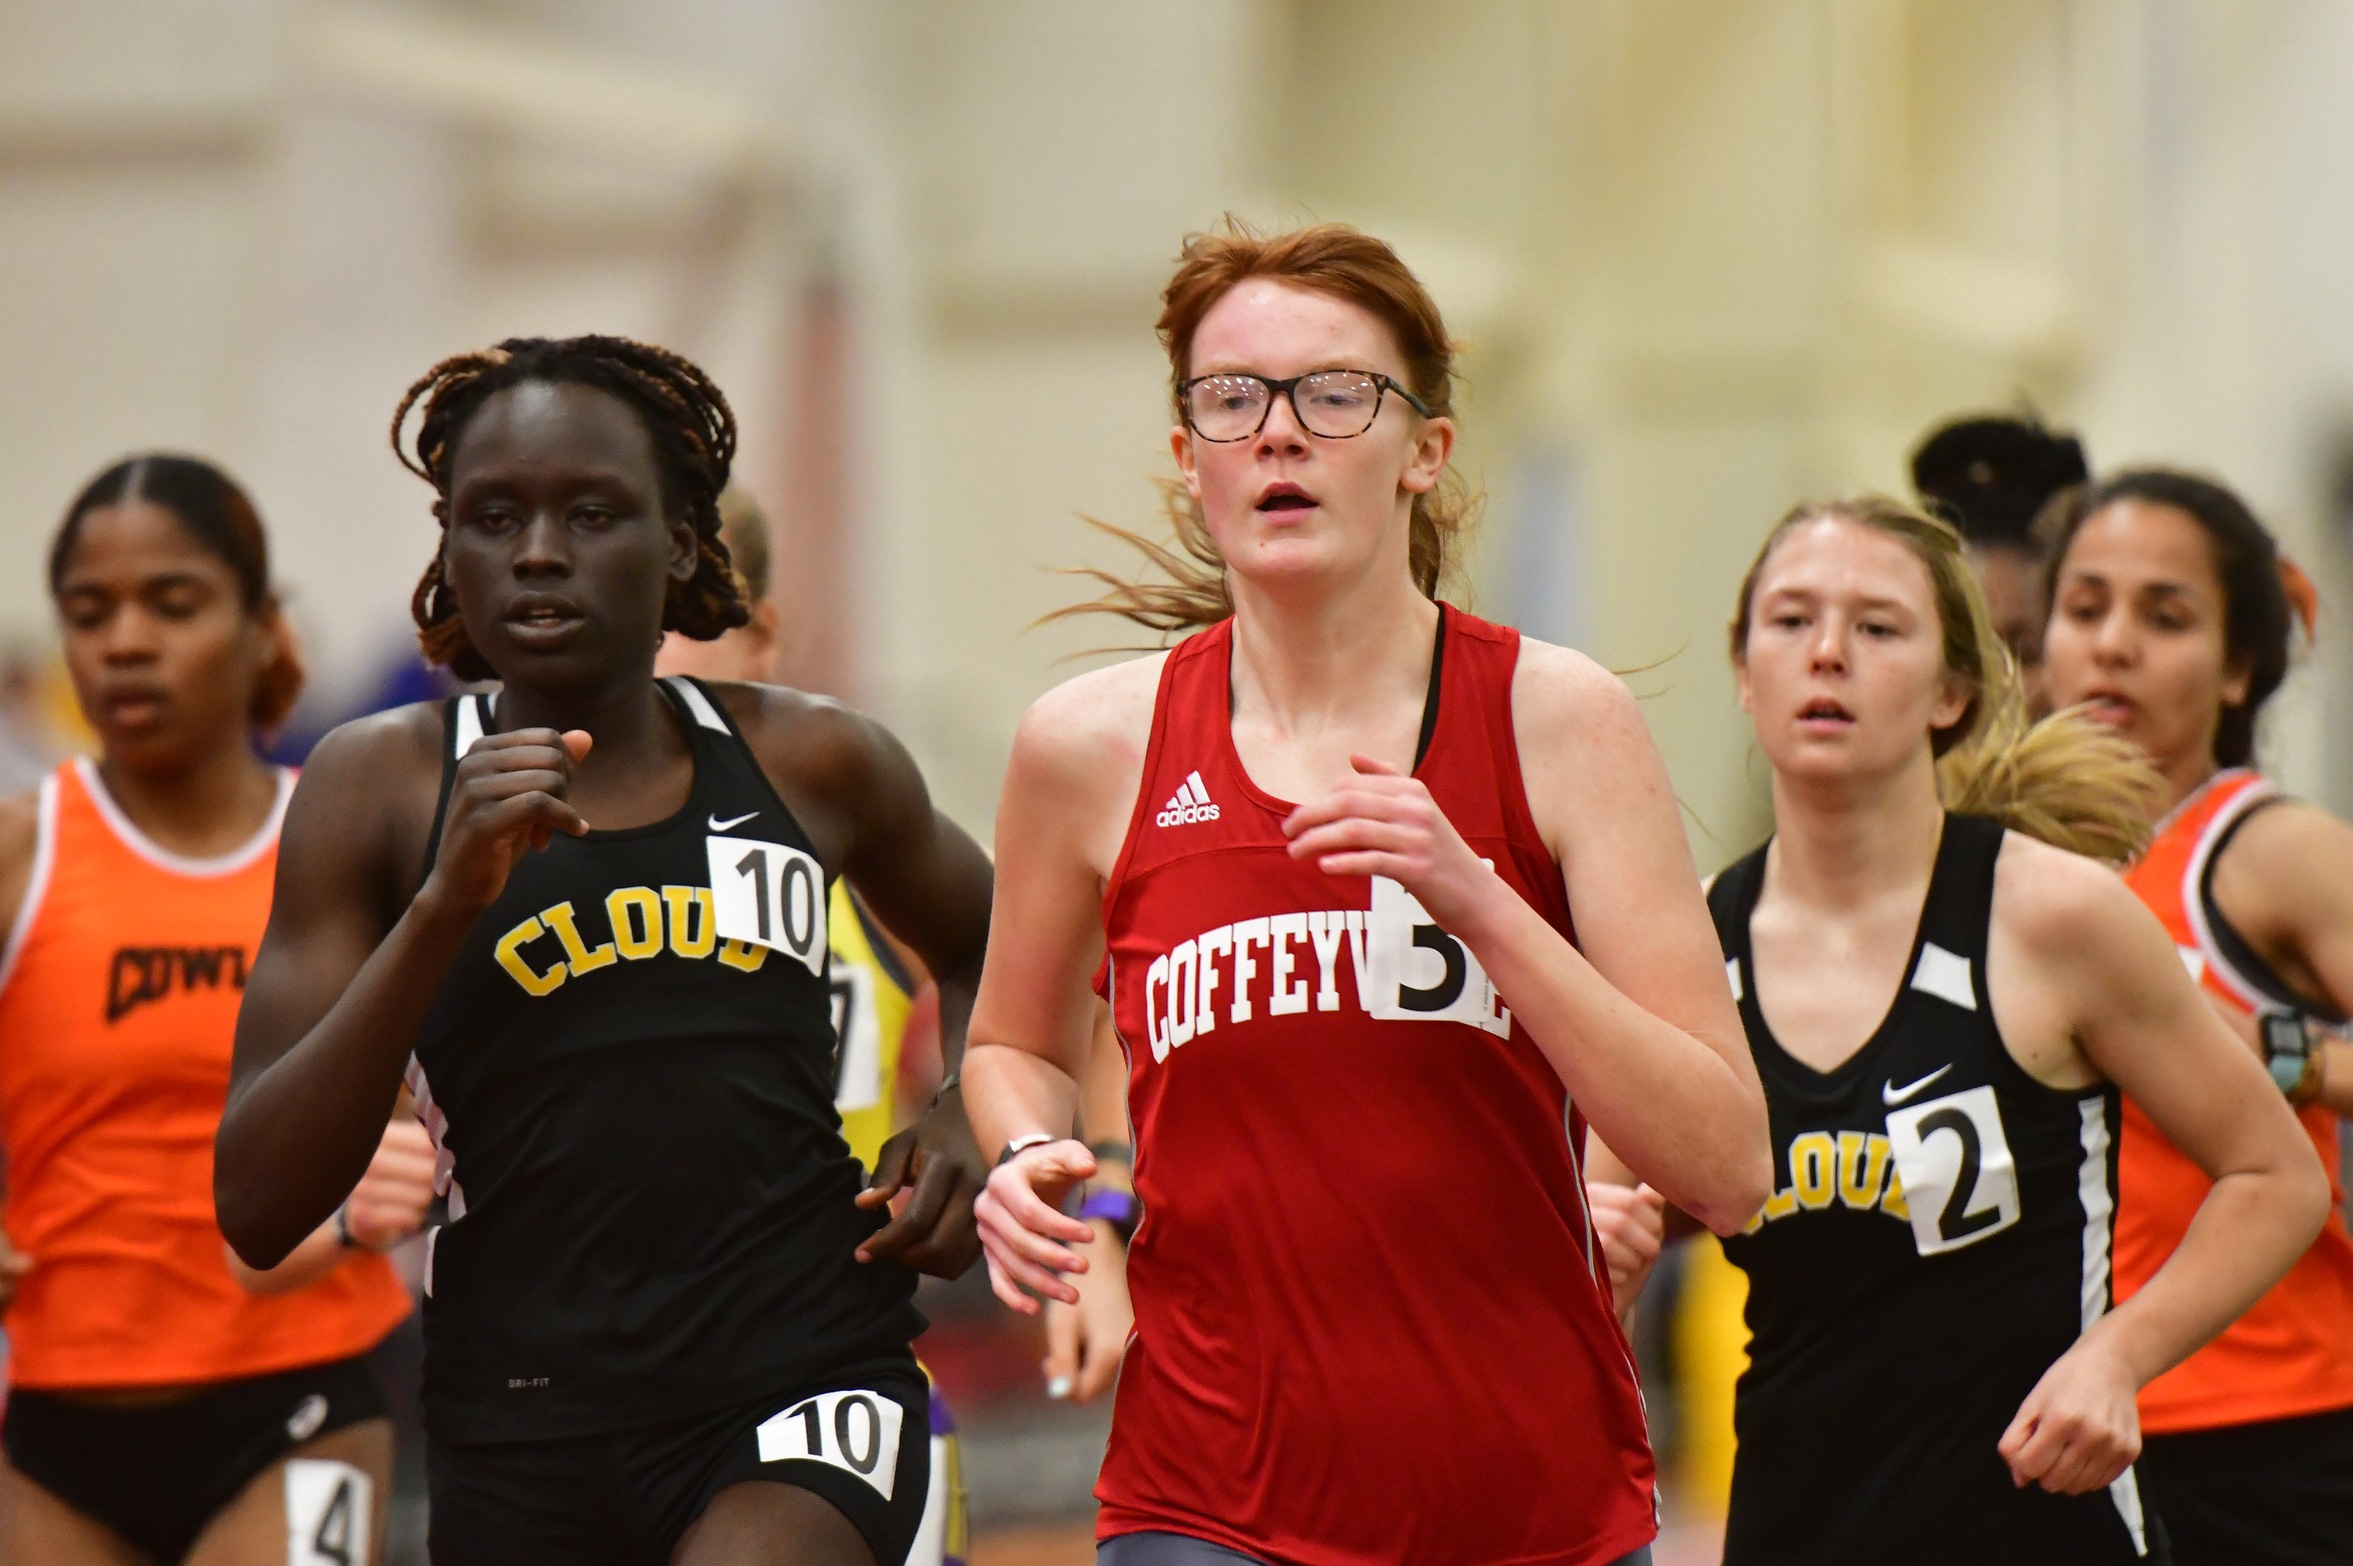 Red Raven Indoor T&F Men Place 4th, Women Place 6th at Region VI Indoor Championships